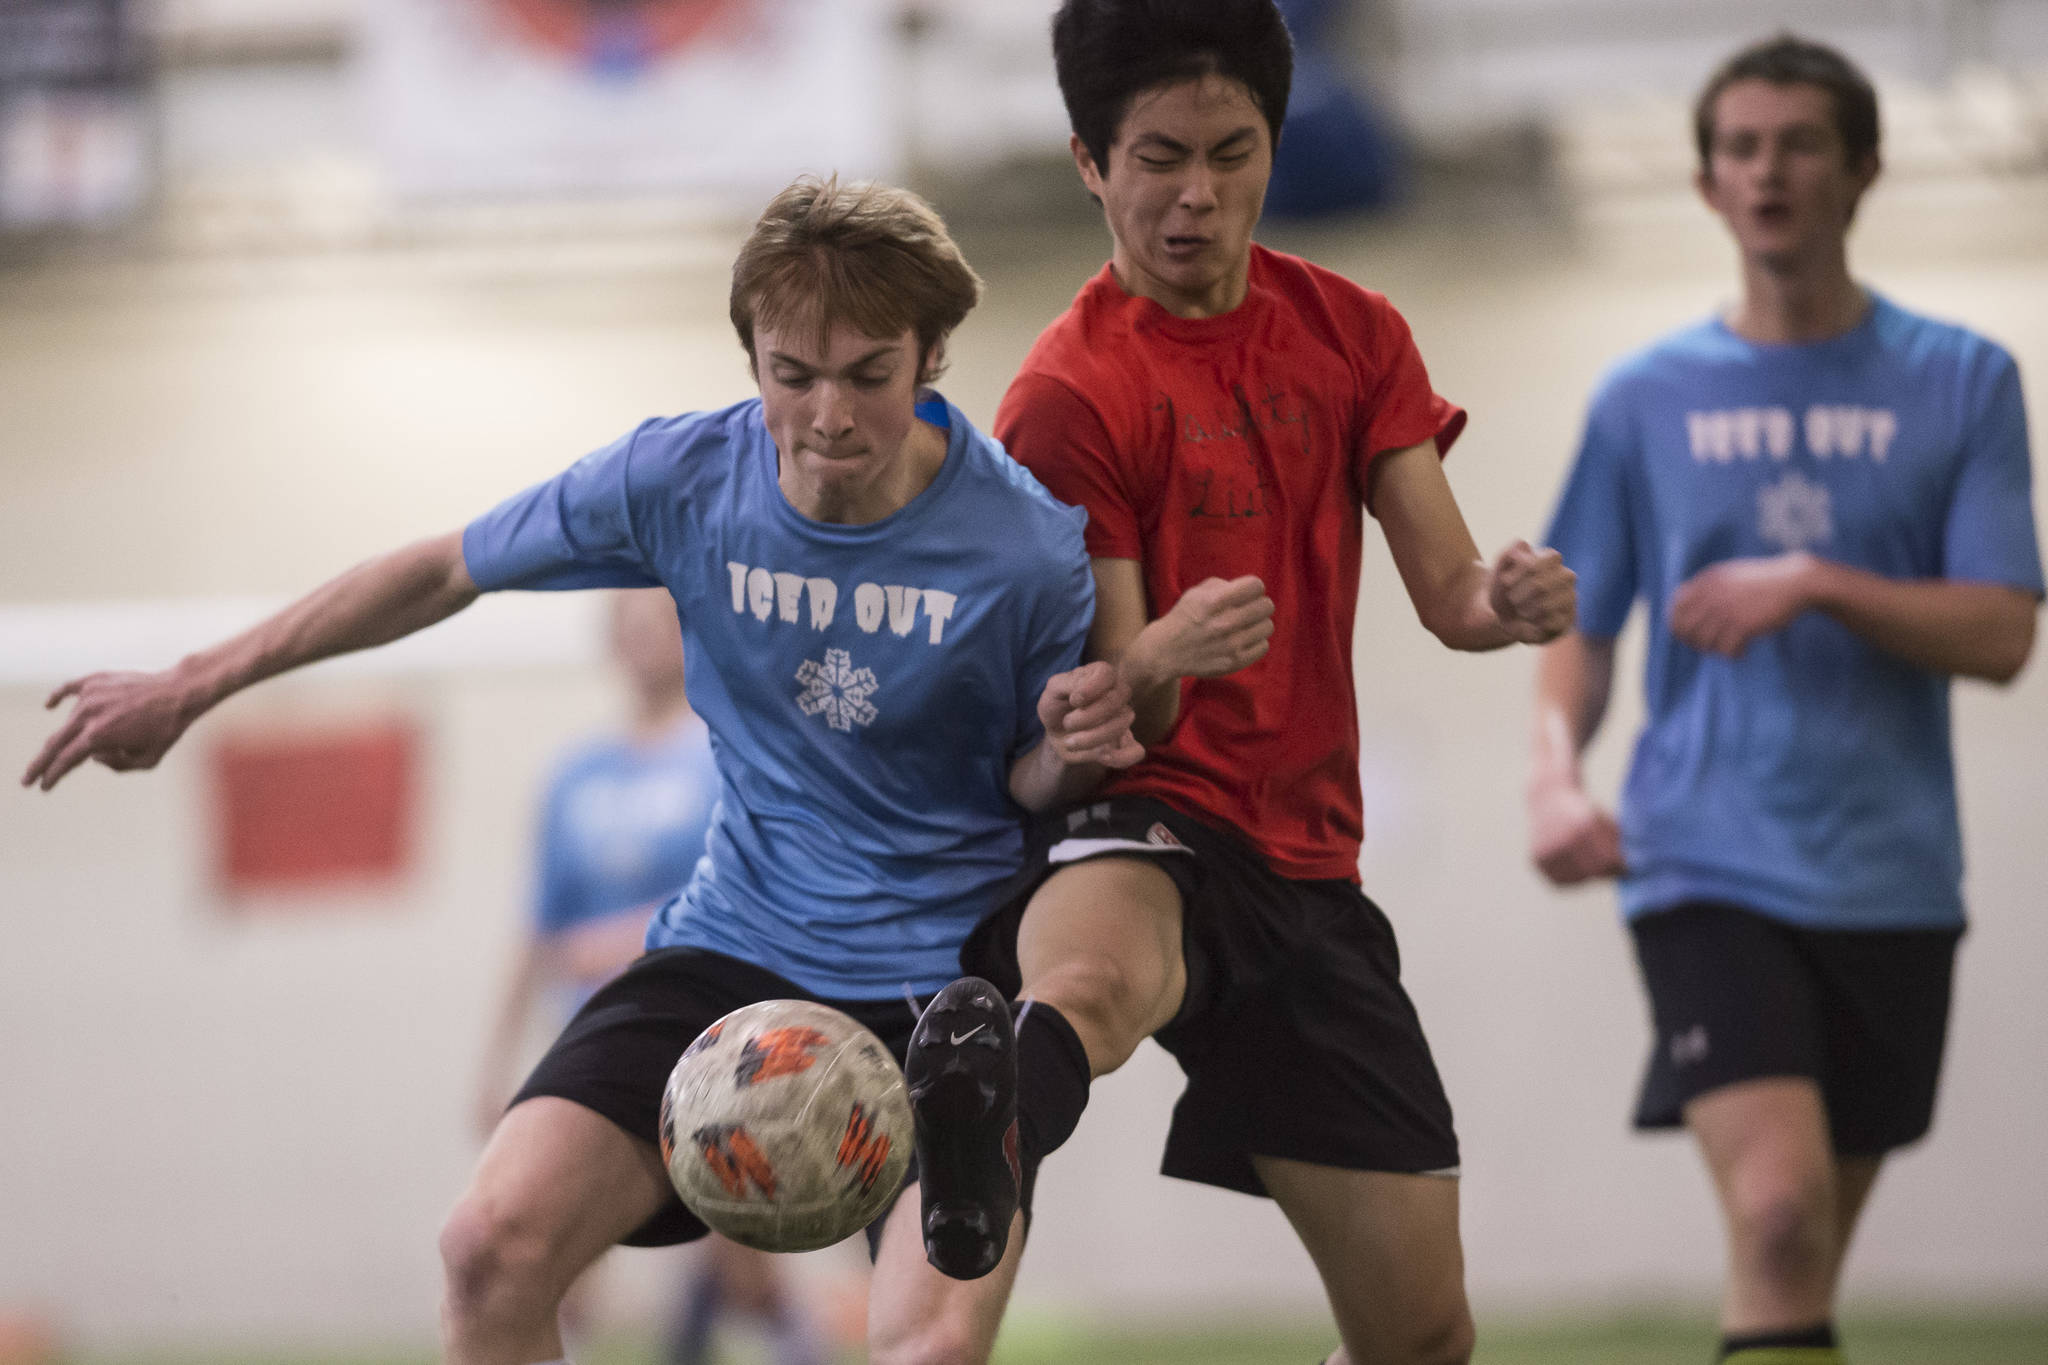 Iced Out’s Kanon Goetz, left, battles Naughty List’s Chaehun Yi in the finals of the high school division at the annual Holiday Cup Soccer Tournament at the Wells Fargo Dimond Park Field House on Monday, Dec. 31, 2018. Iced Out won 8-2. (Michael Penn | Juneau Empire)